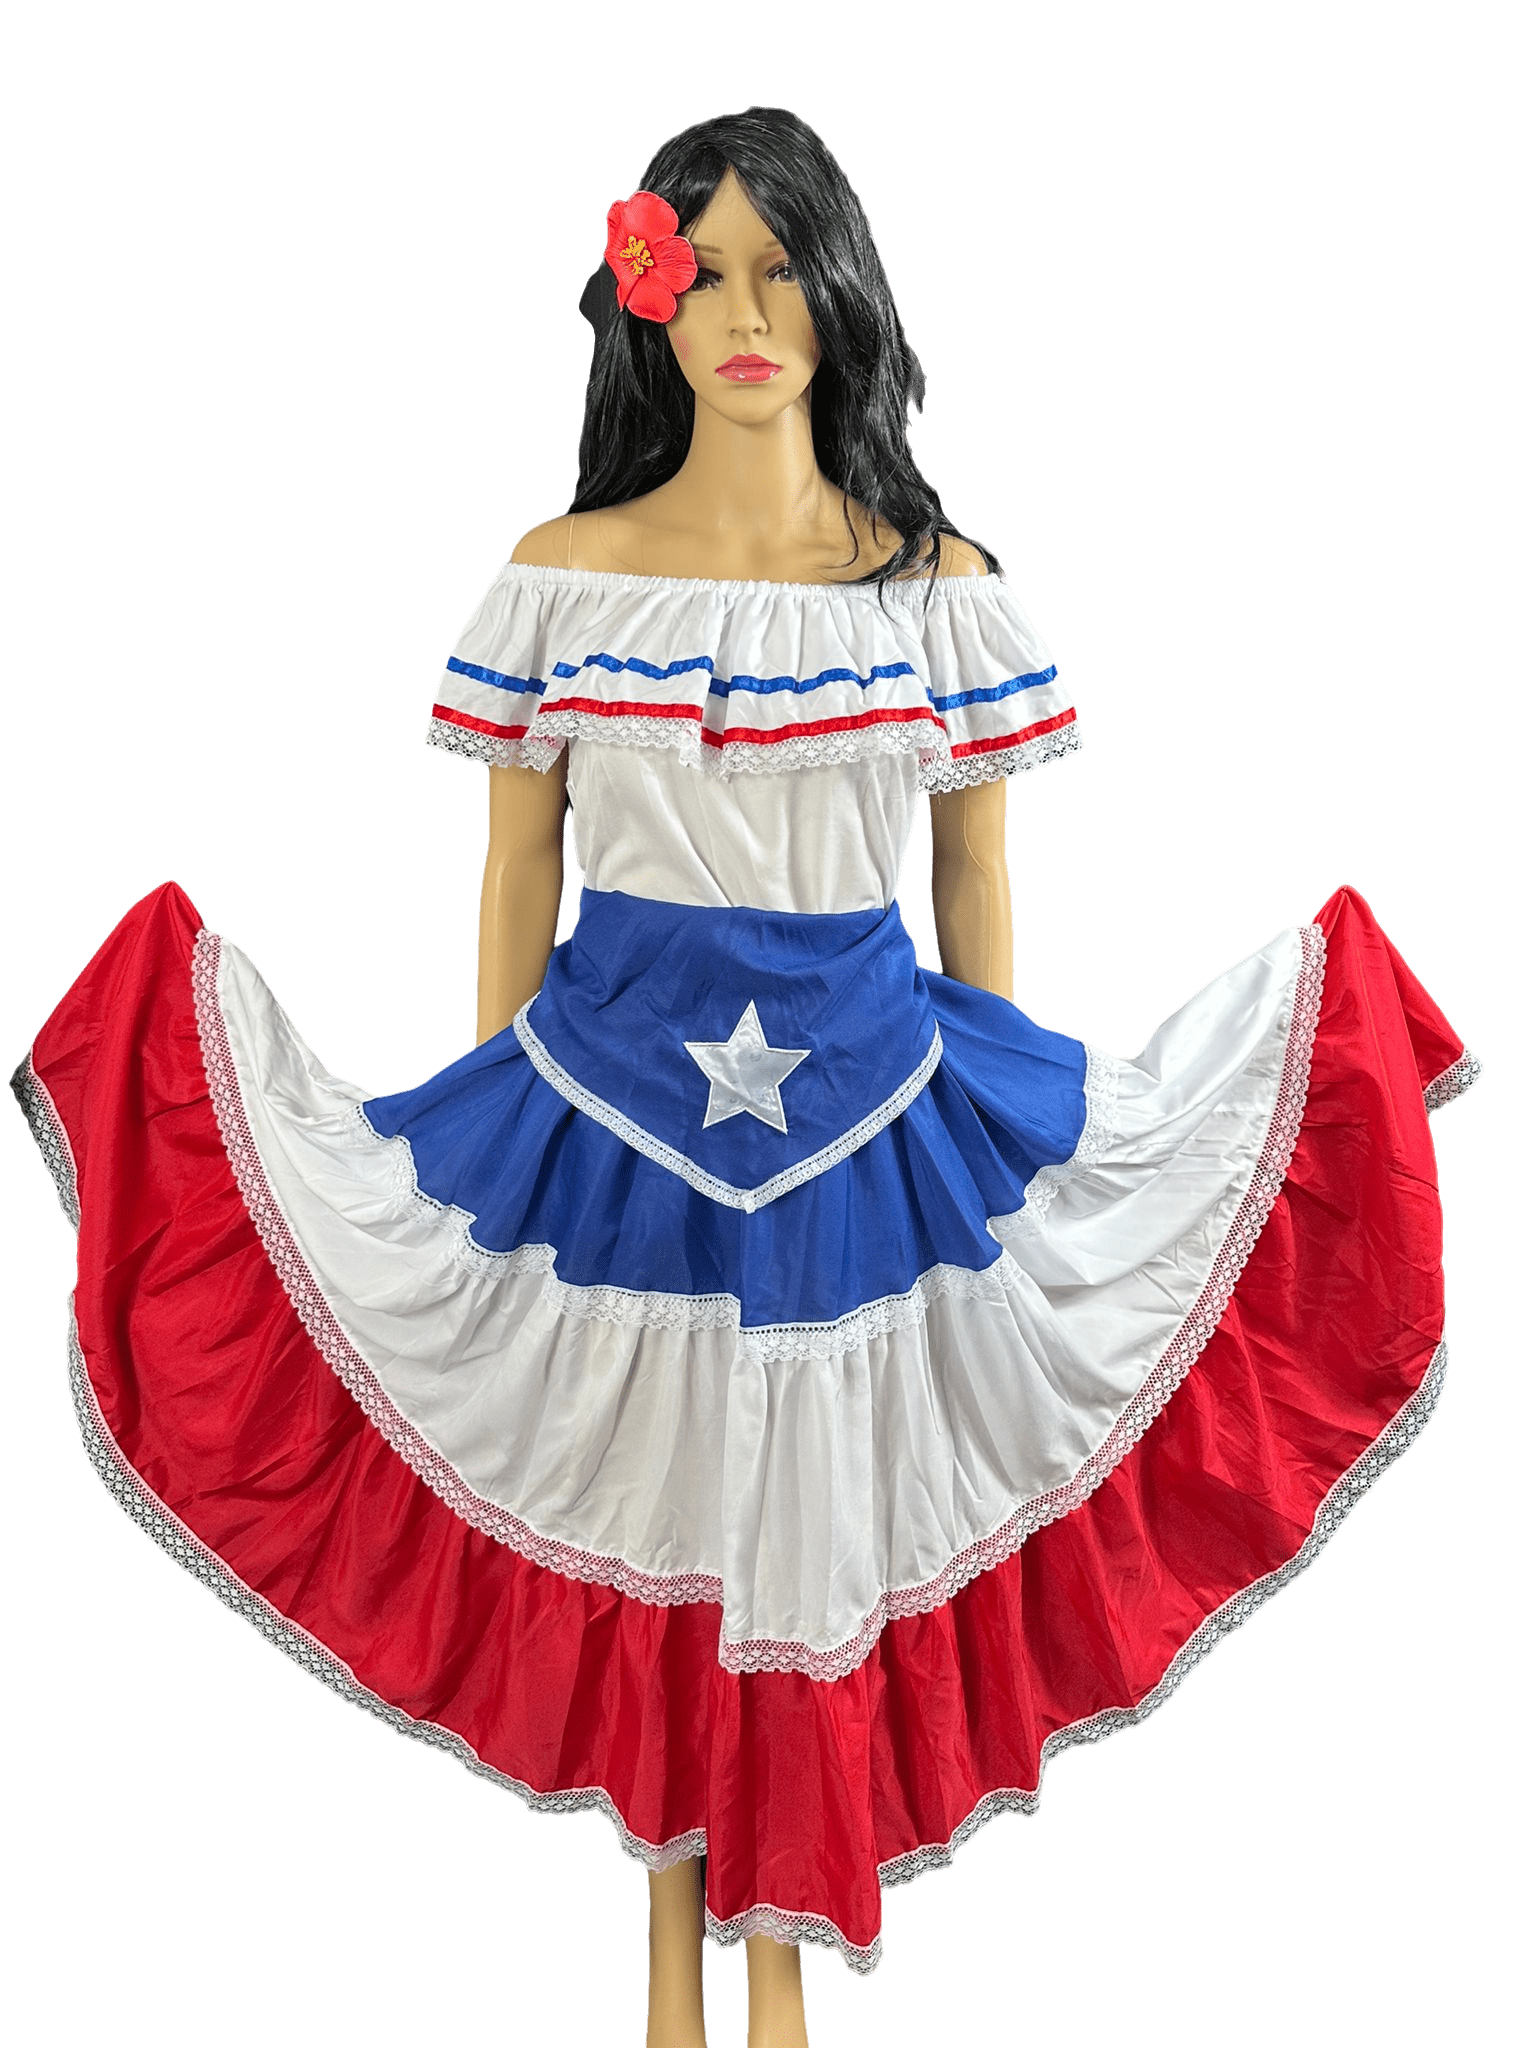 dresses for puerto rico